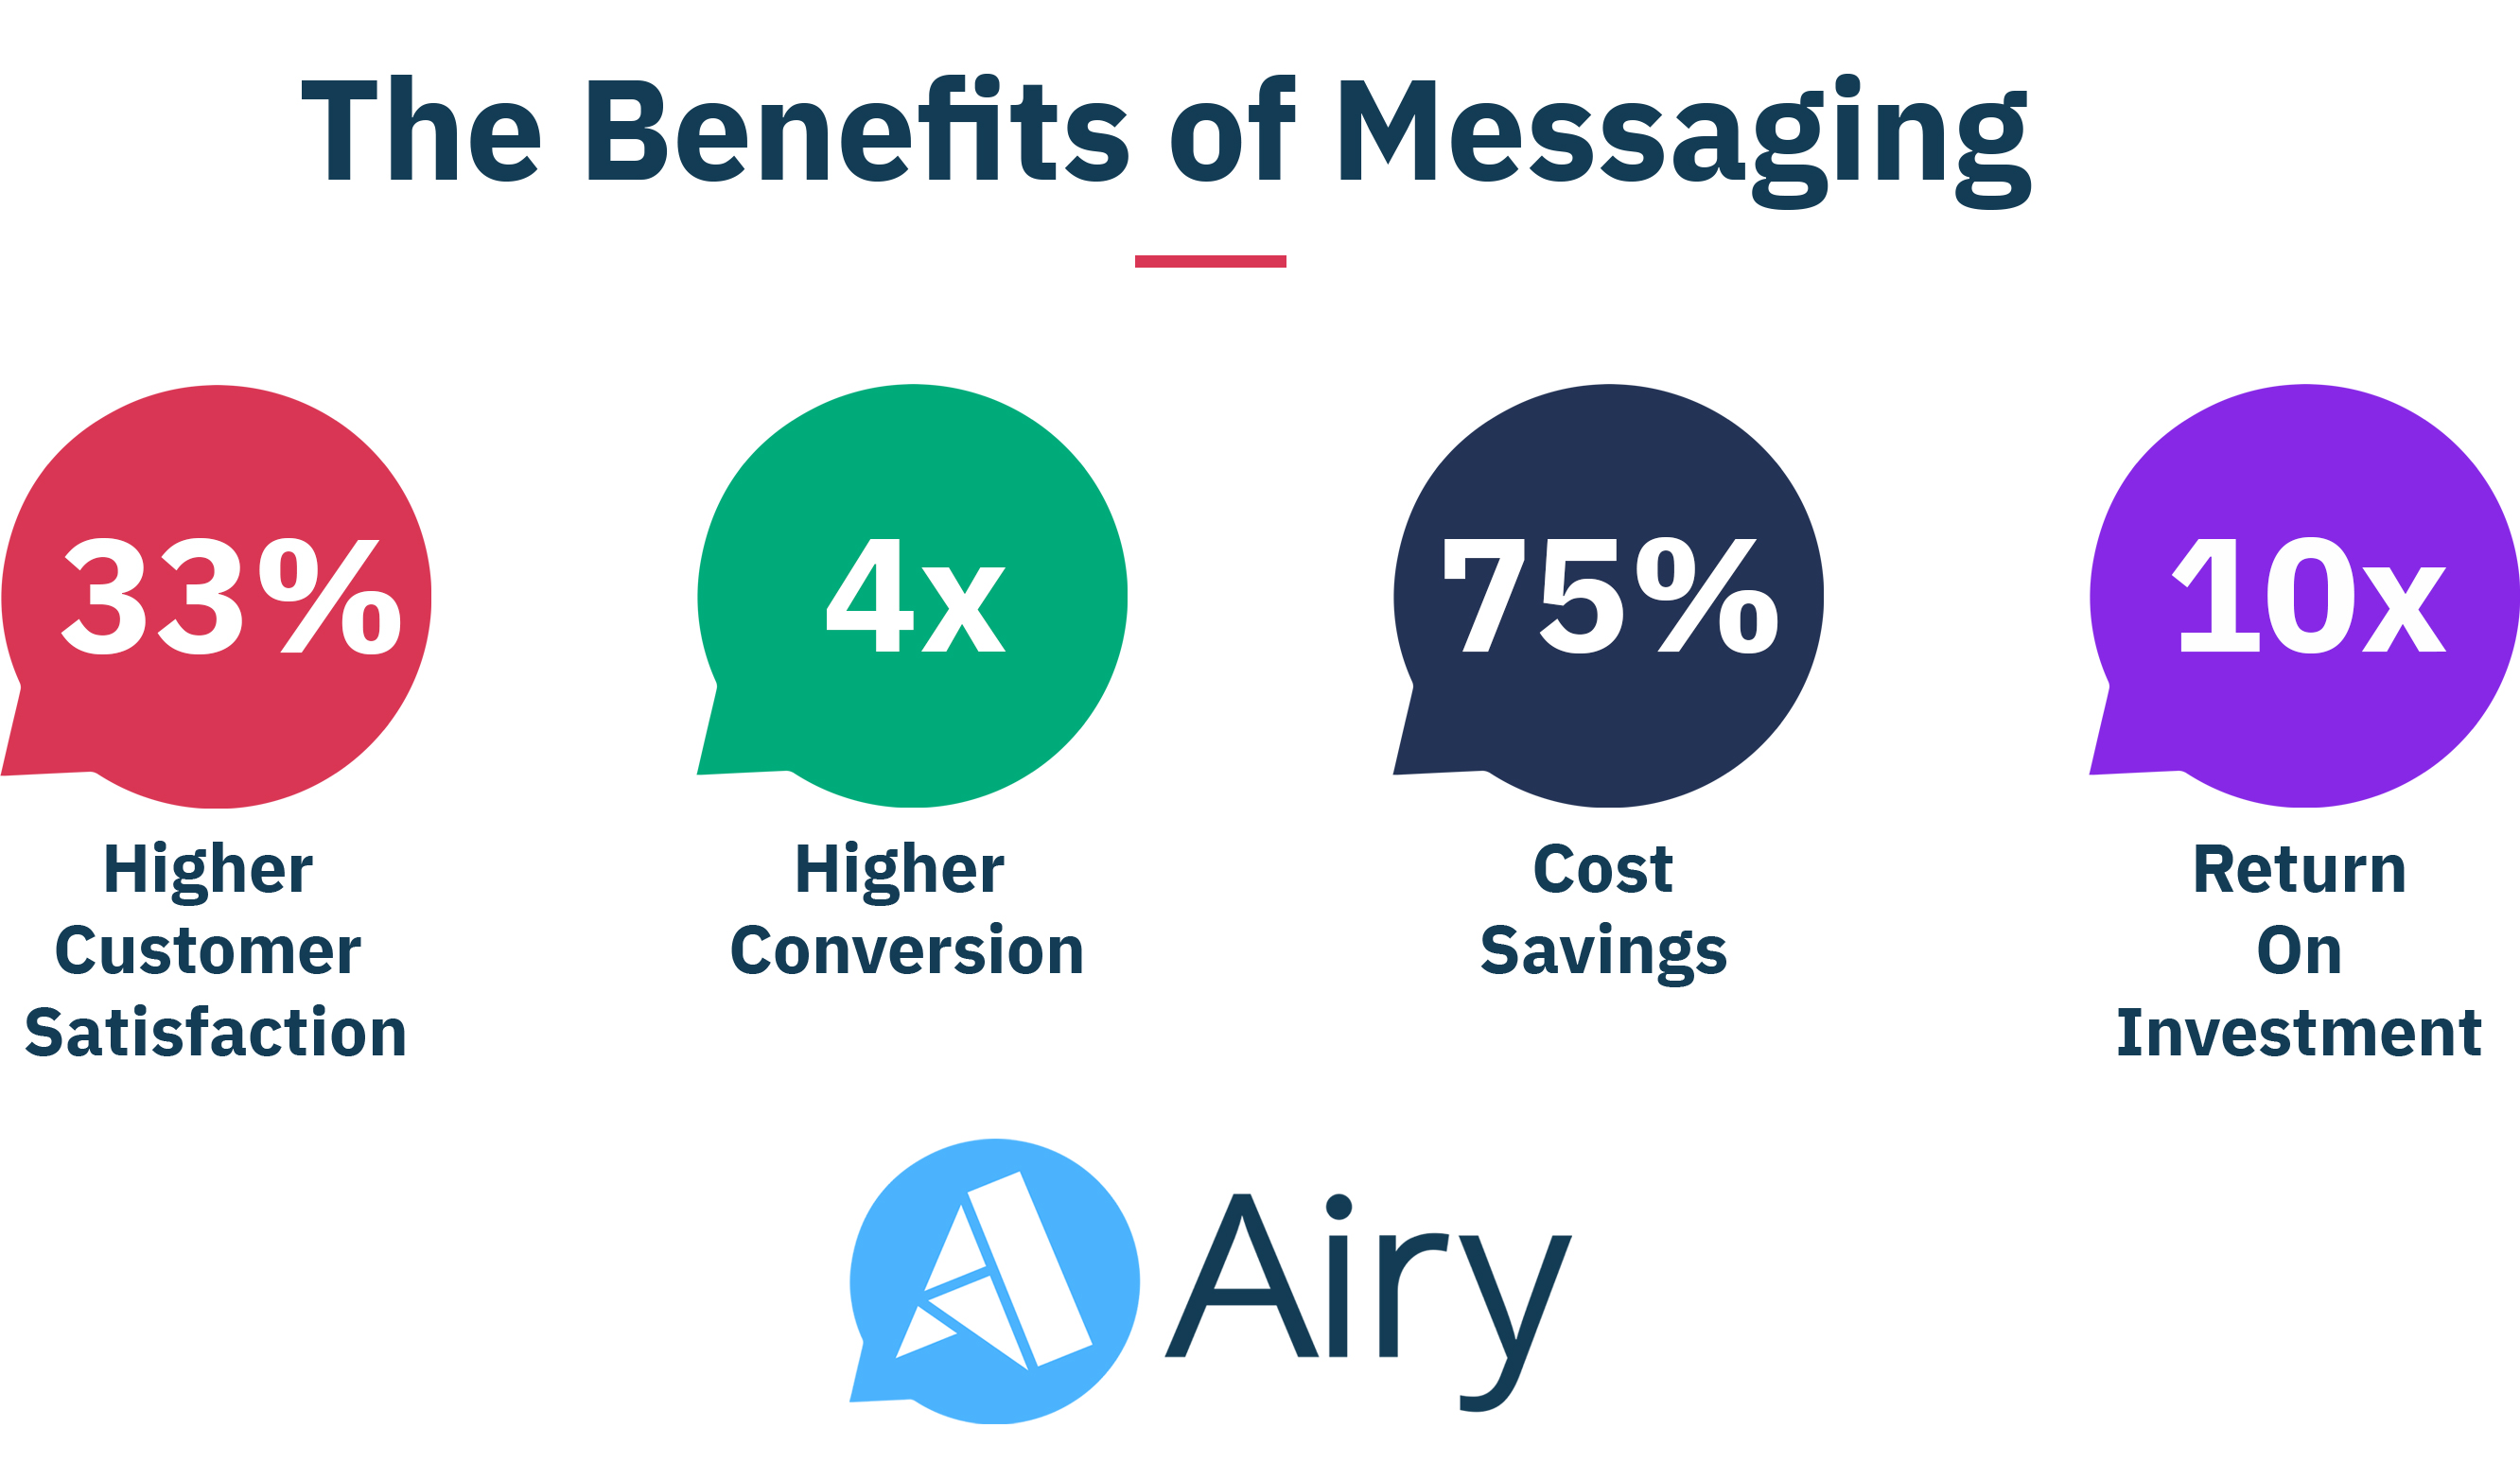 Messaging increases customer satisfaction while saving companies time and money.